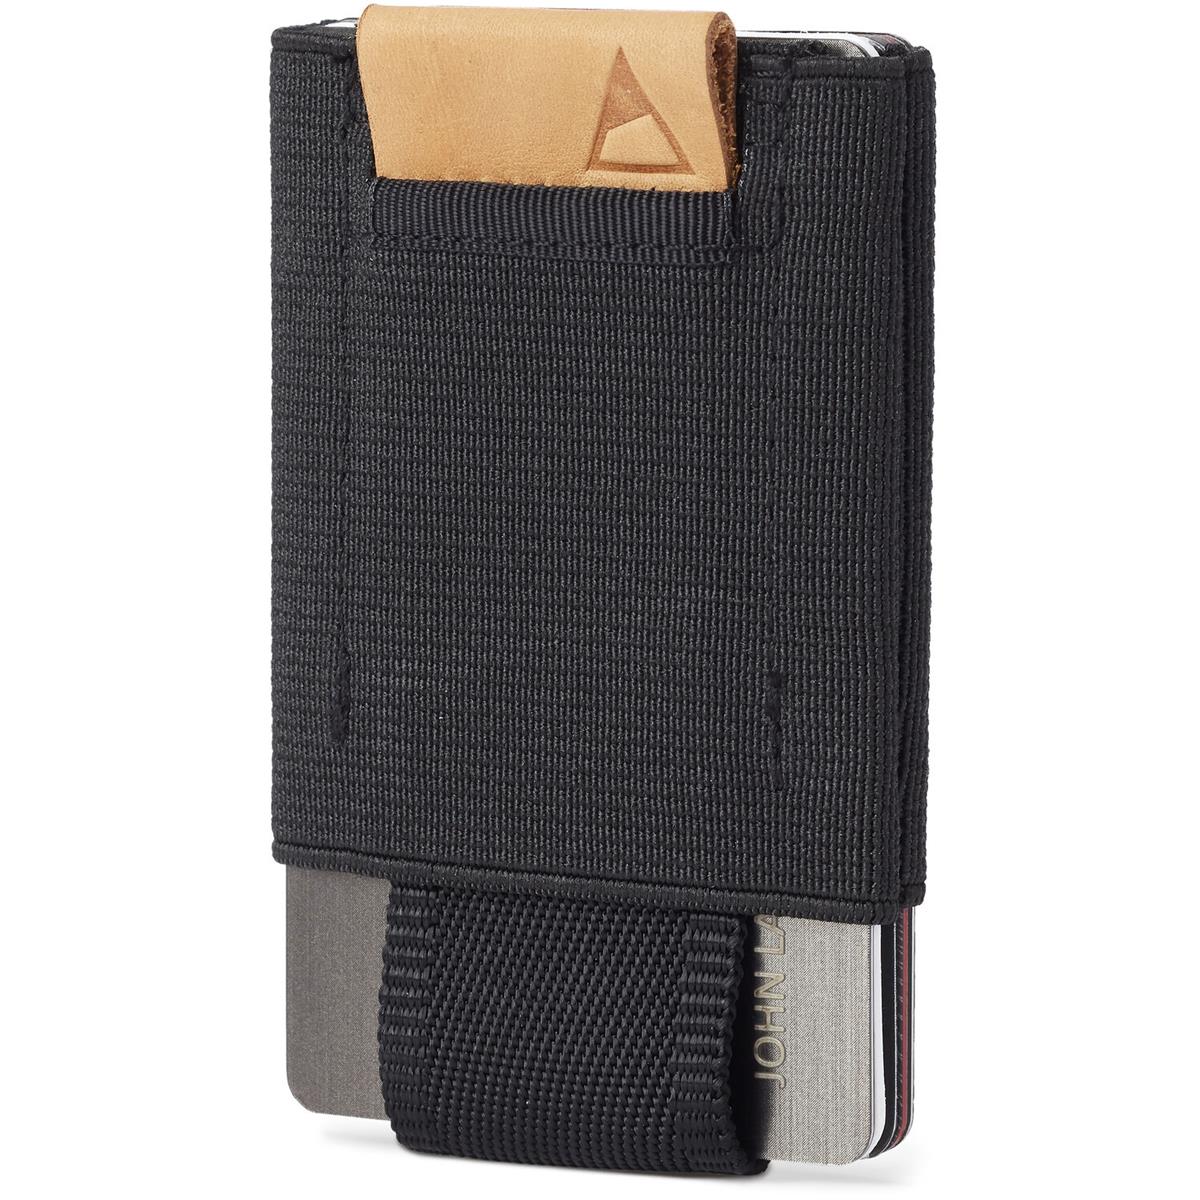 Image of Nomatic Black Wallet with Leather Tab